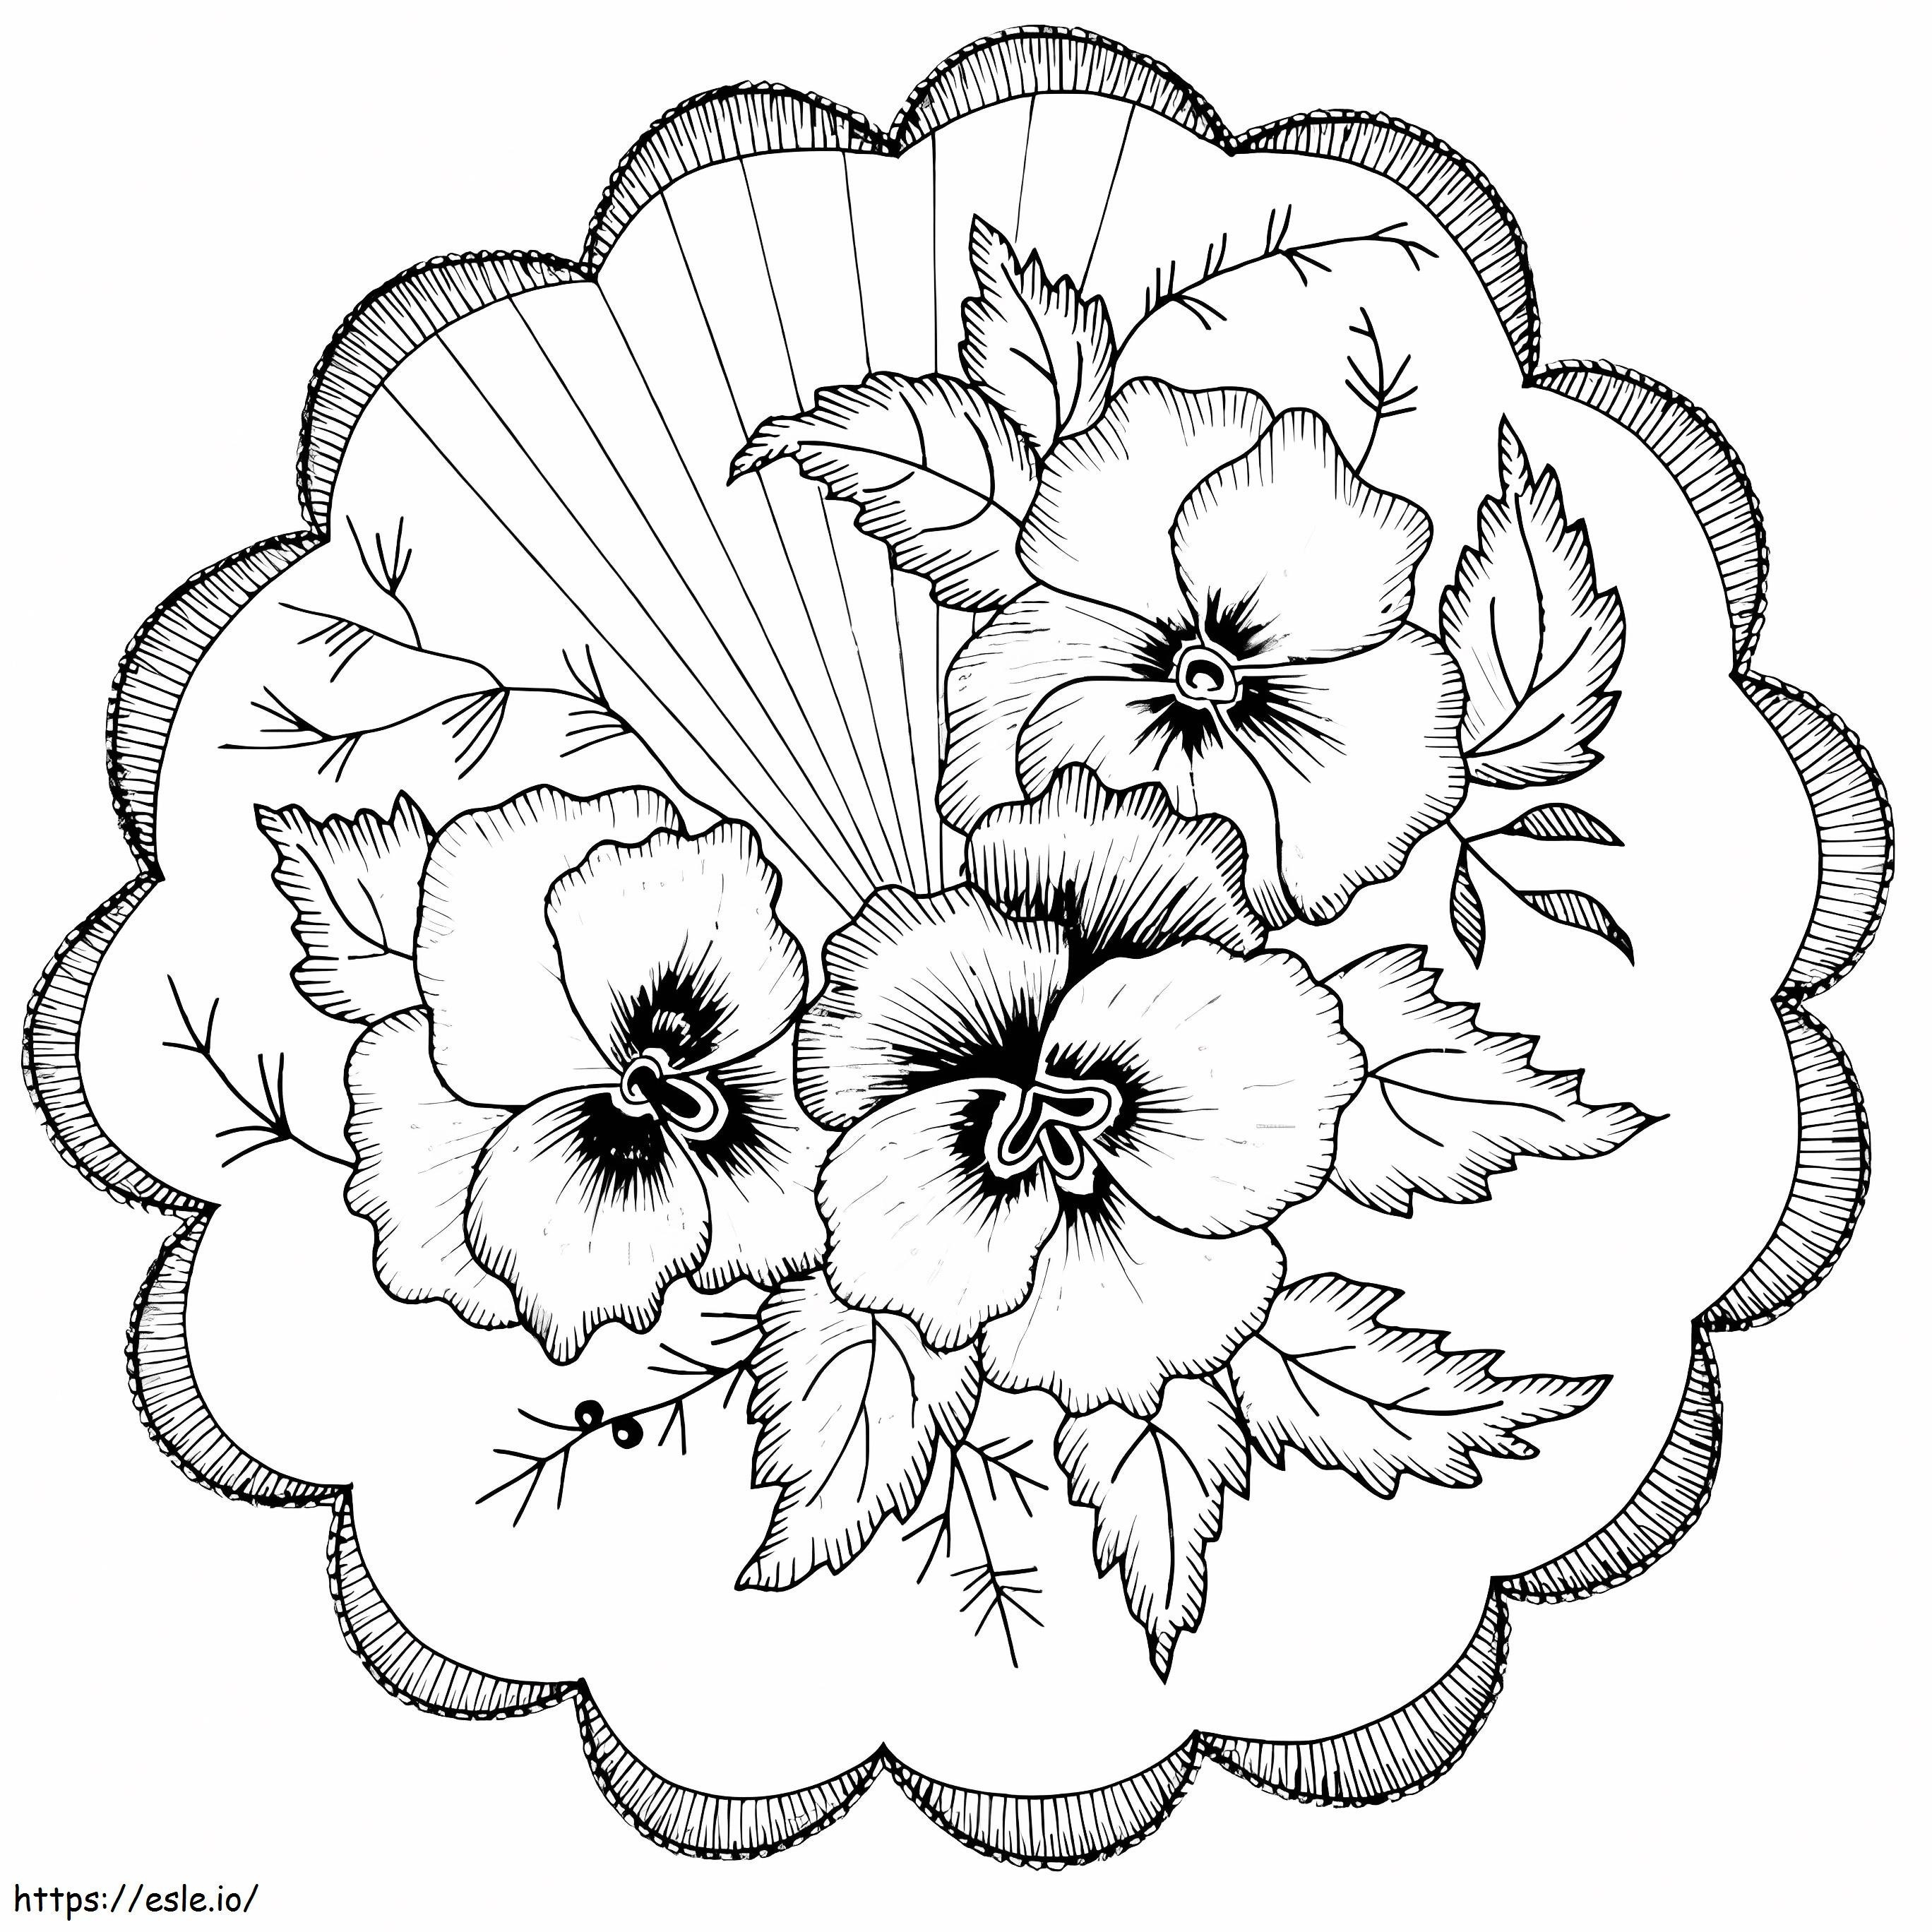 Pansy Flowers coloring page